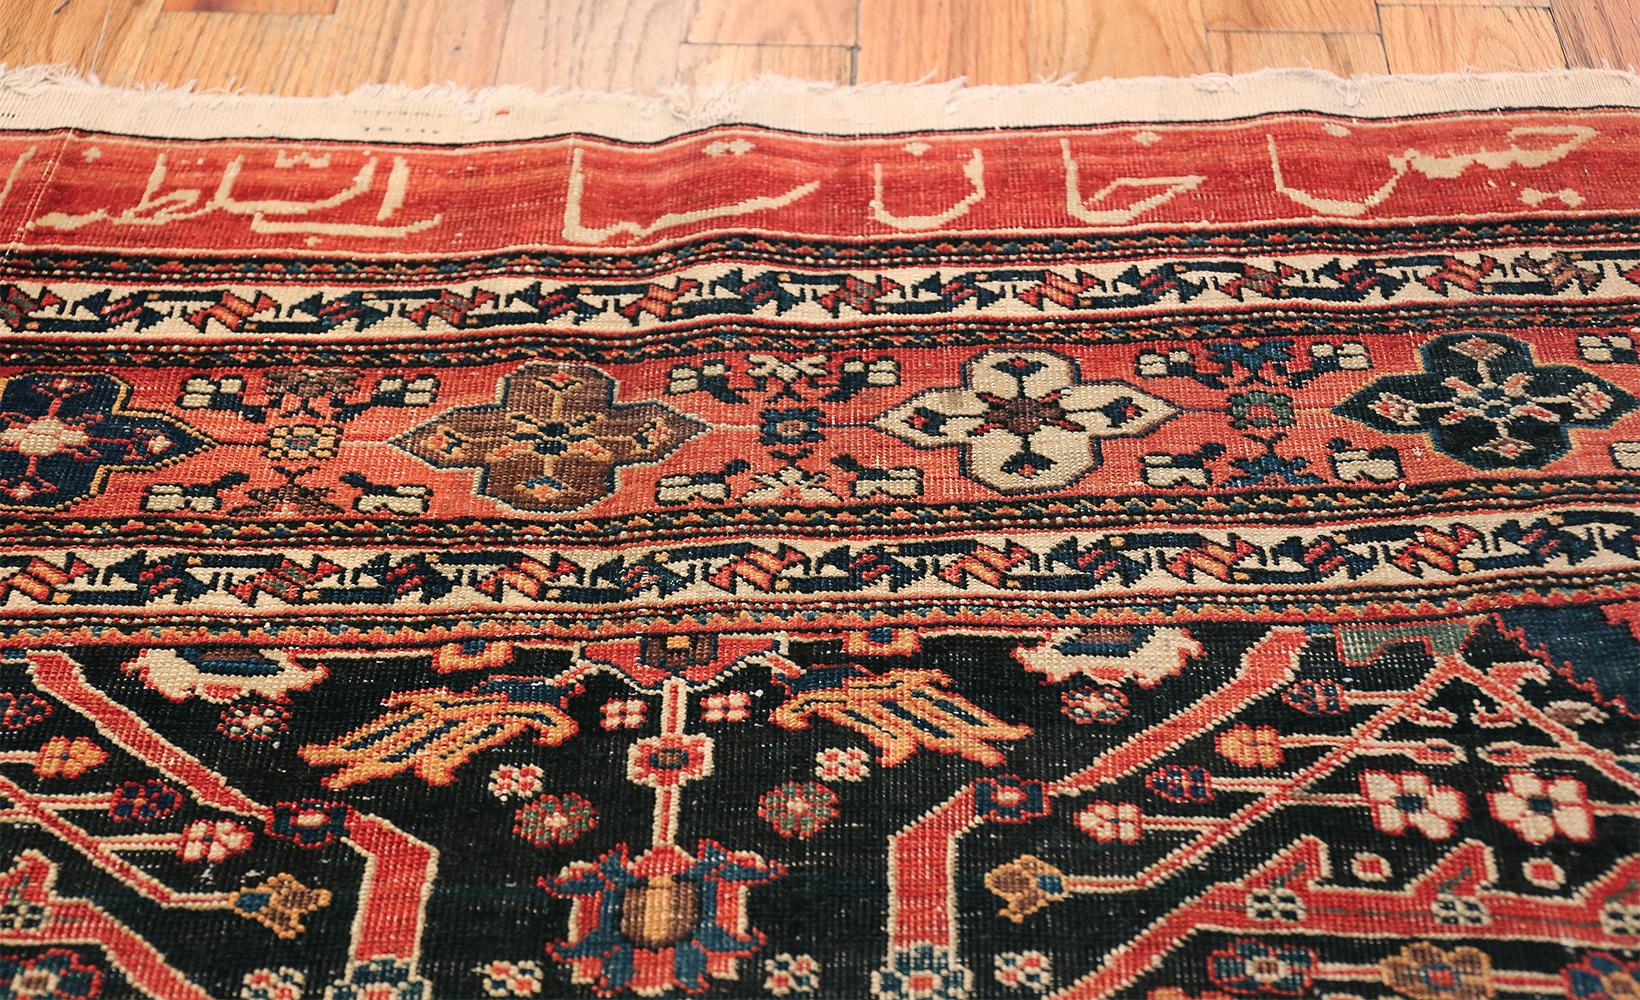 19th Century Antique Tribal Persian Bakhtiari Shabby Chic Rug. Size: 7 ft x 14 ft 3 in